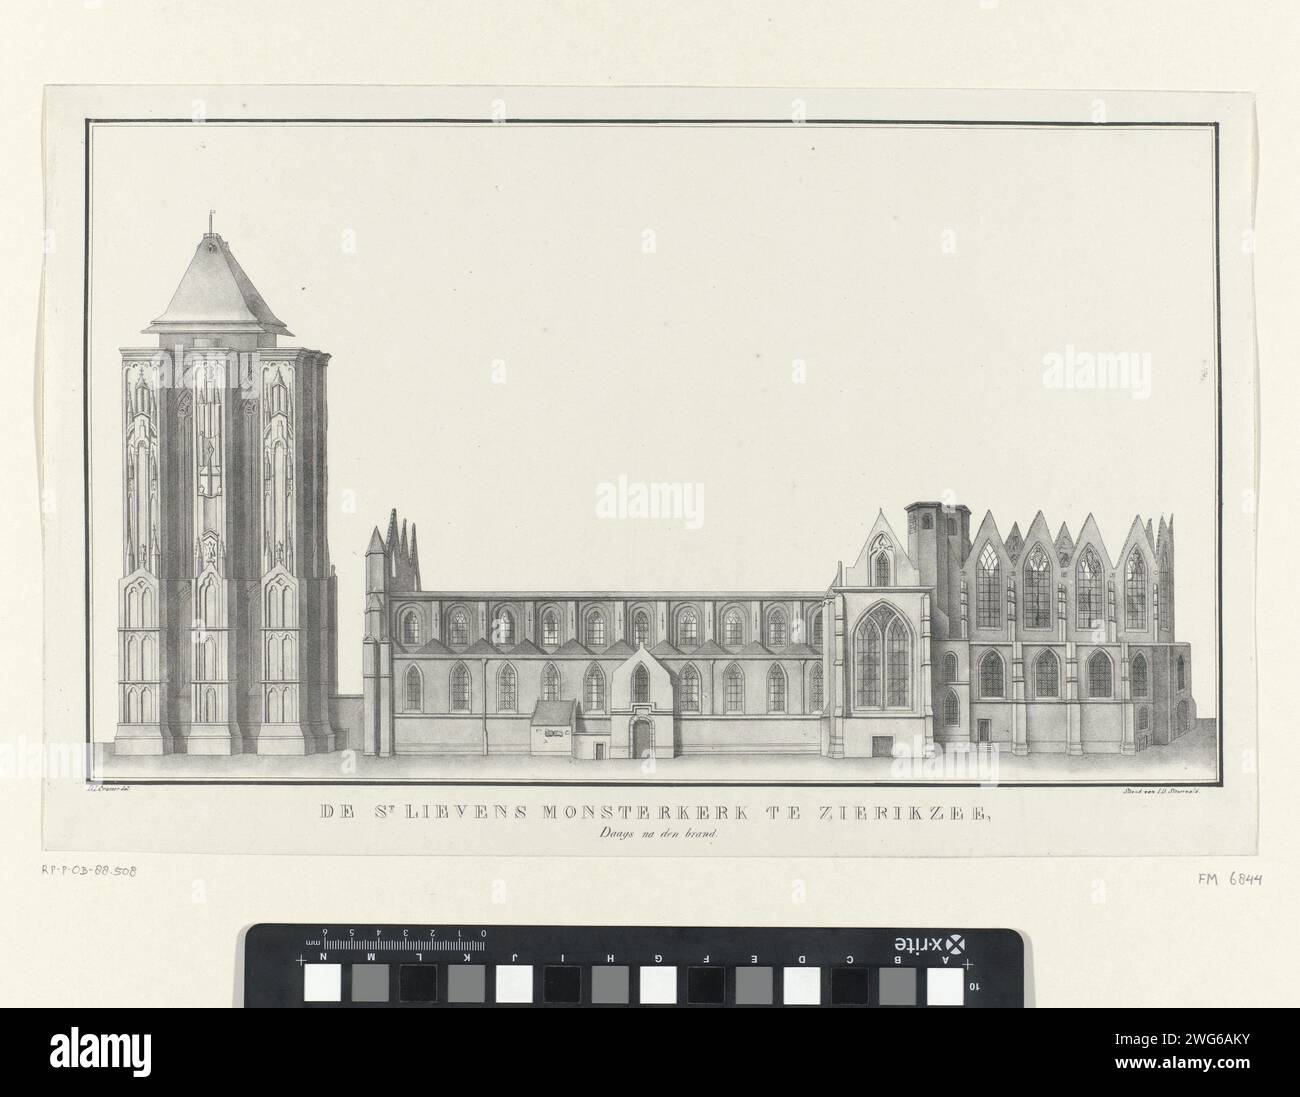 Ruin of the Sint-Lievensmonsterkerk in Zierikzee, after the fire of 1832, 1832 print View of the building of the Sint-Lievensmonsterkerk in Zierikzee, the day after the fire of 6 October 1832. On the left the tower that remained intact, on the right the destroyed church building. Netherlands paper  ruin of church, monastery, etc. Sint-Lievensmonsterkerk Stock Photo